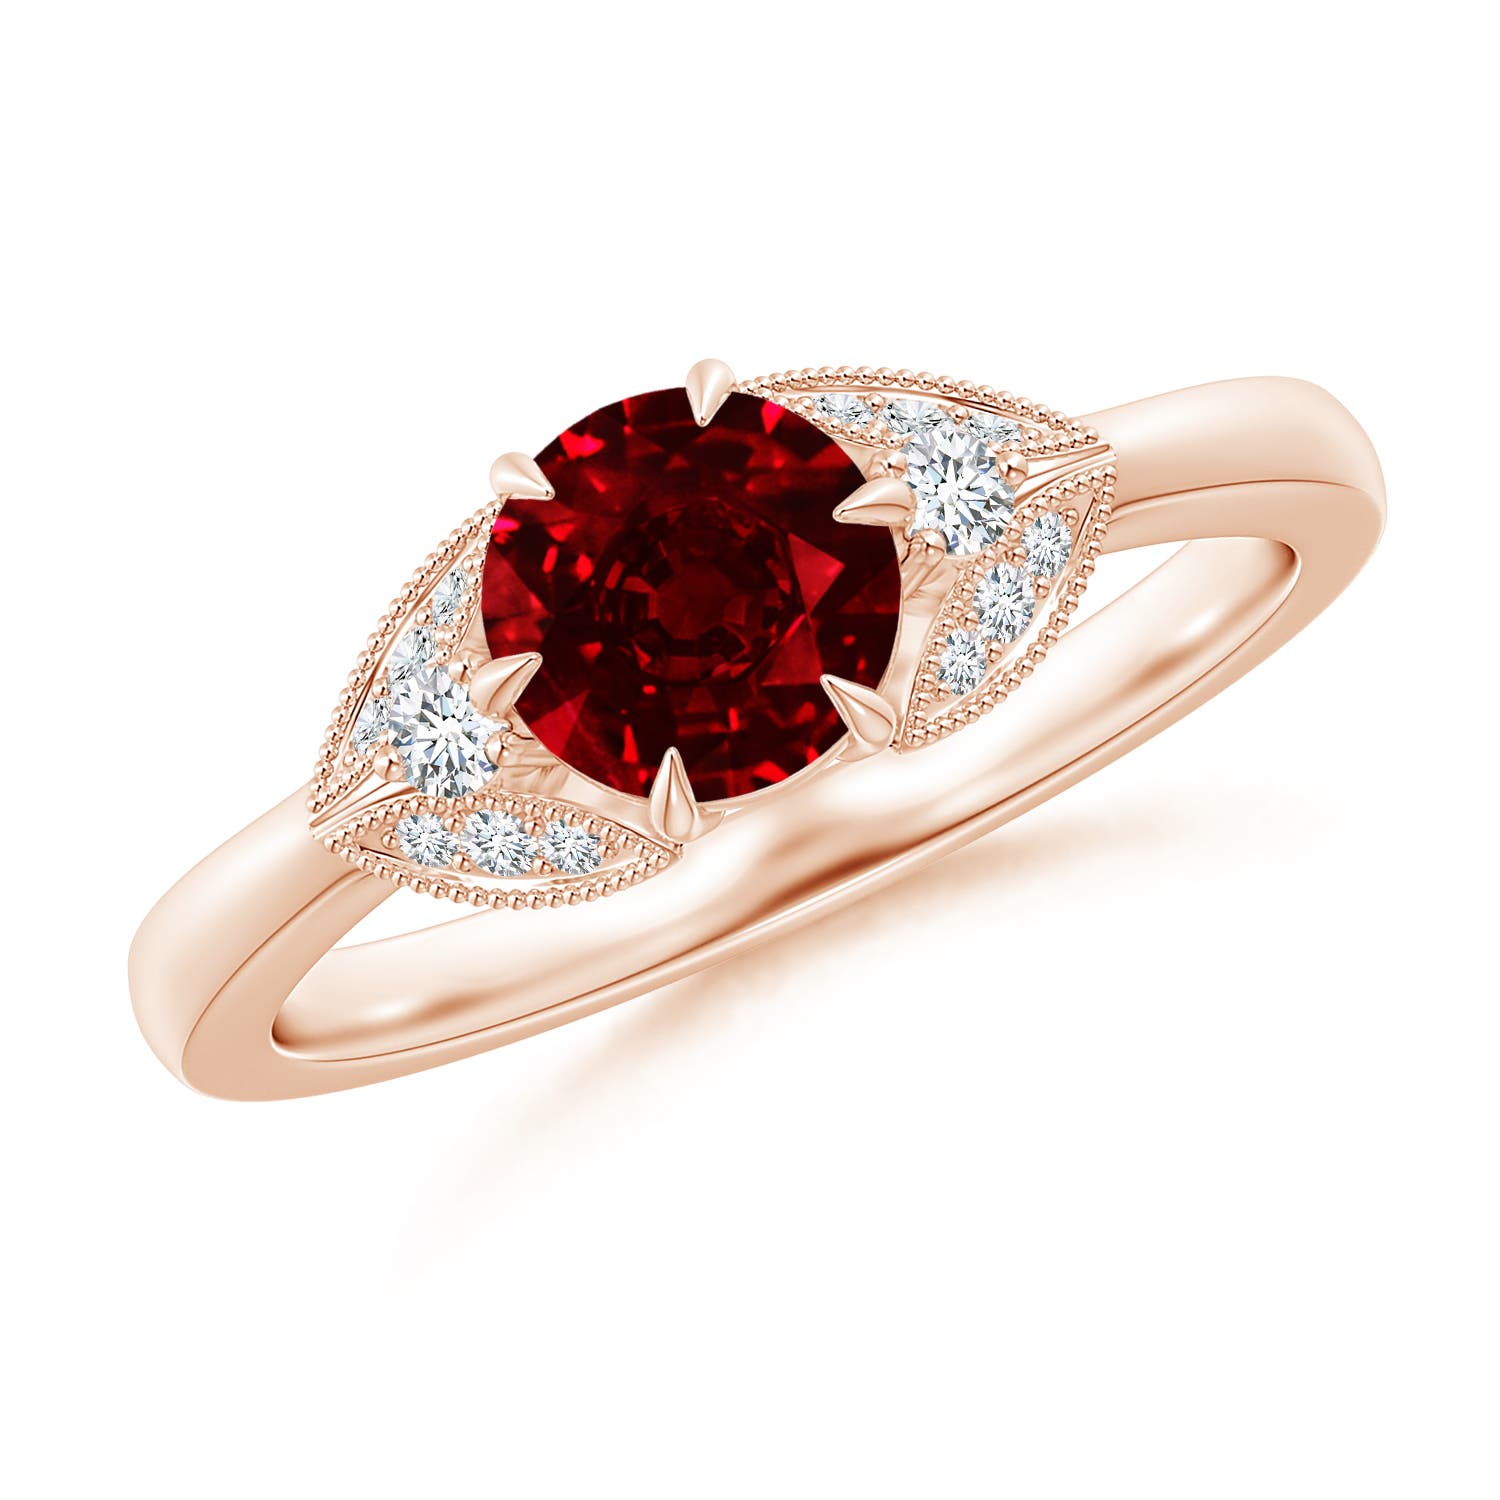 AAAA - Ruby / 1.1 CT / 14 KT Rose Gold